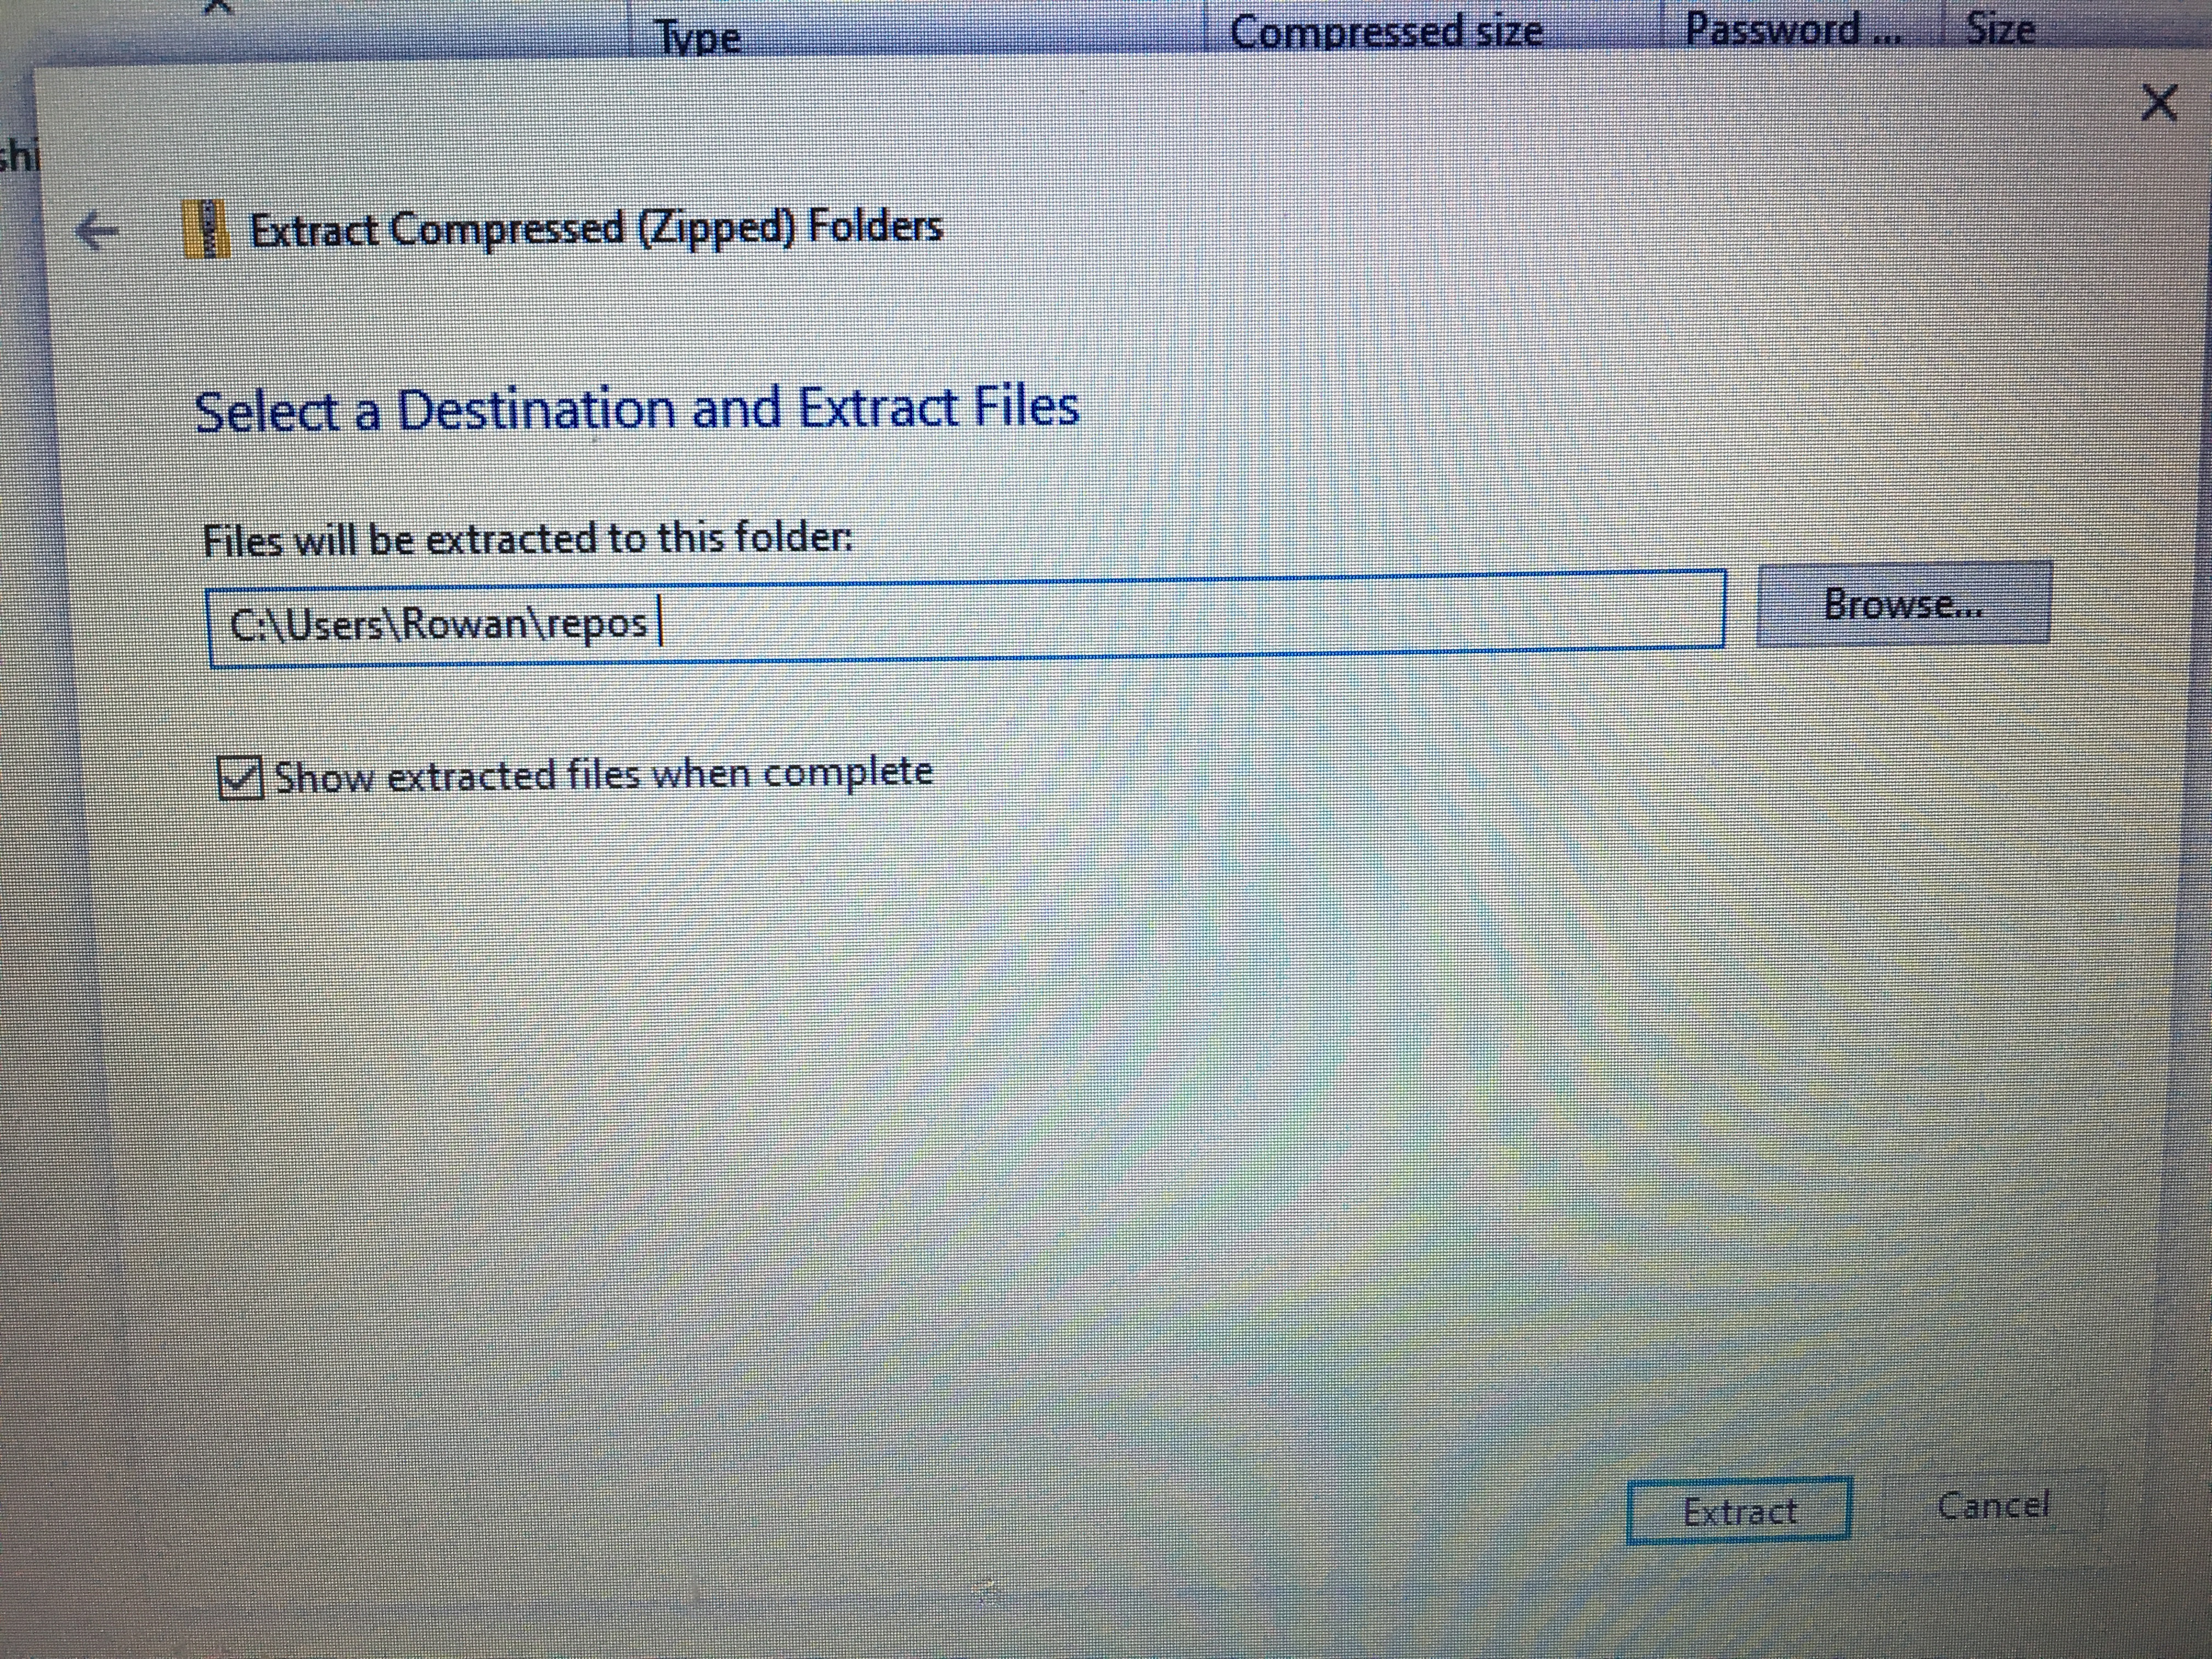 Extracting the files on Windows